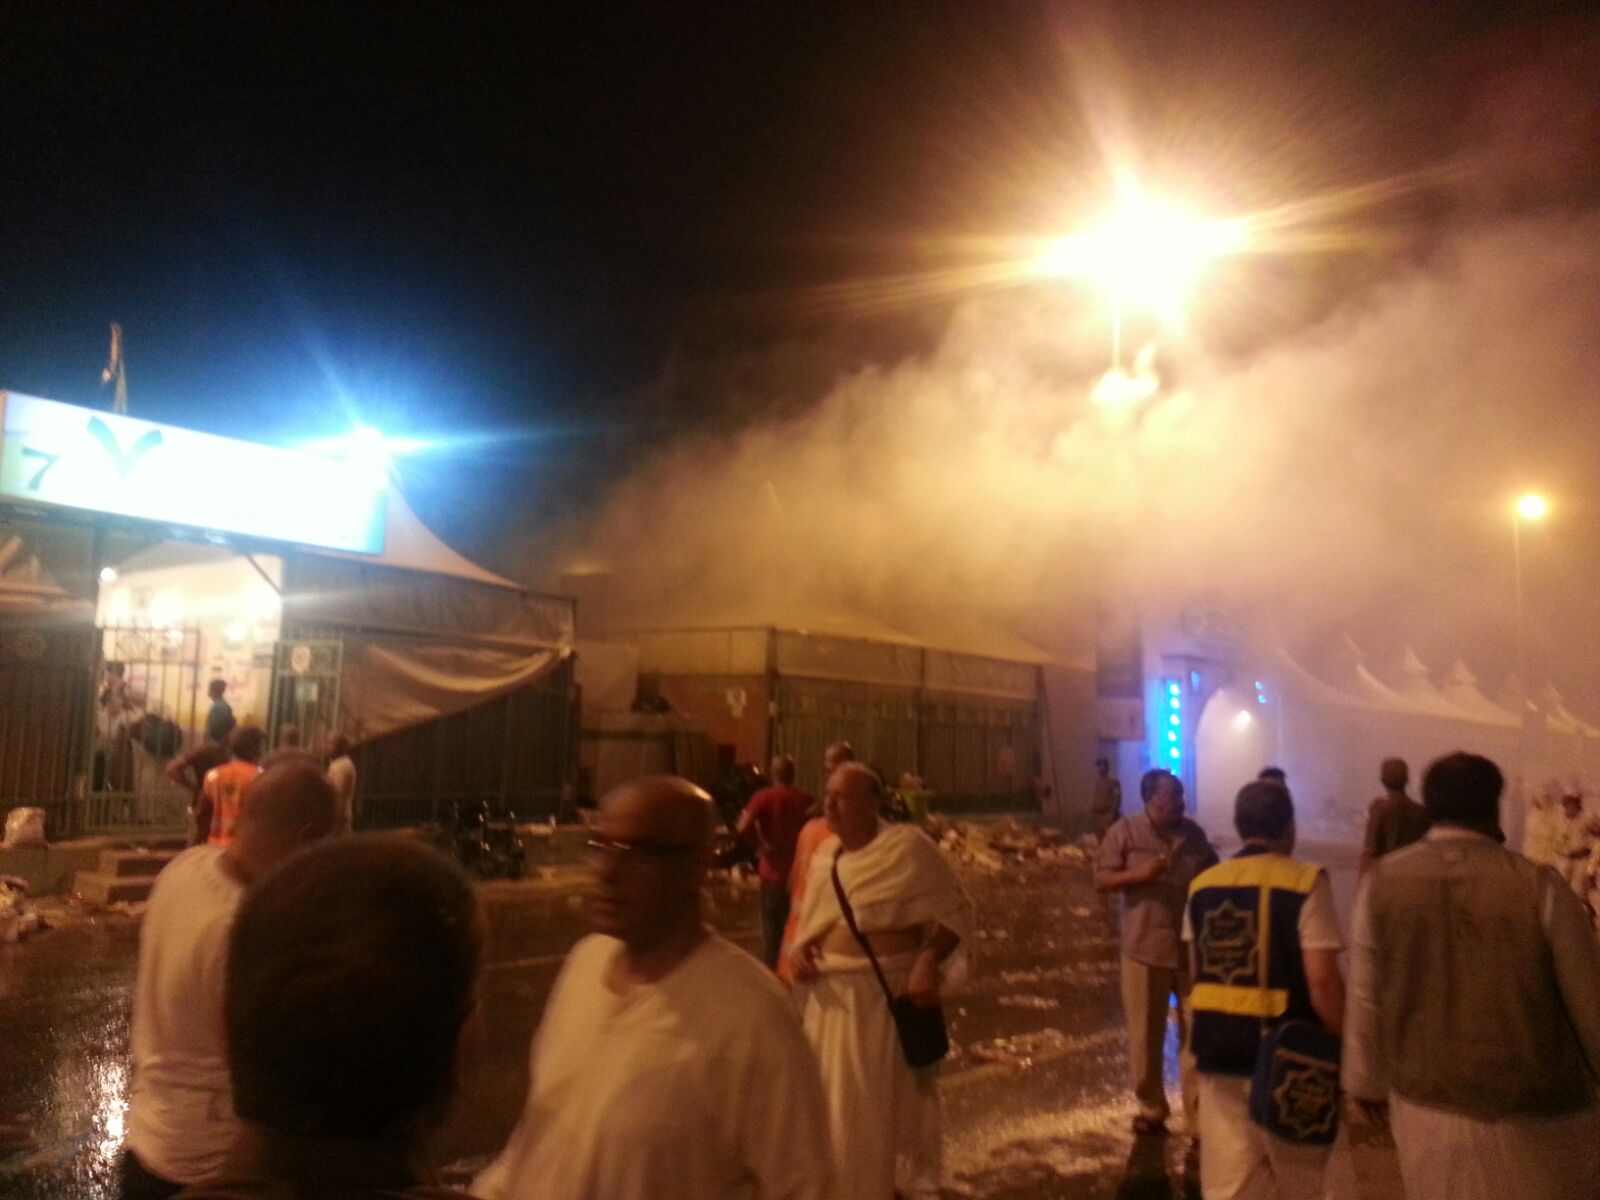 Pilgrims’ Tent Catches Fire in Mina, Several Egyptians Injured